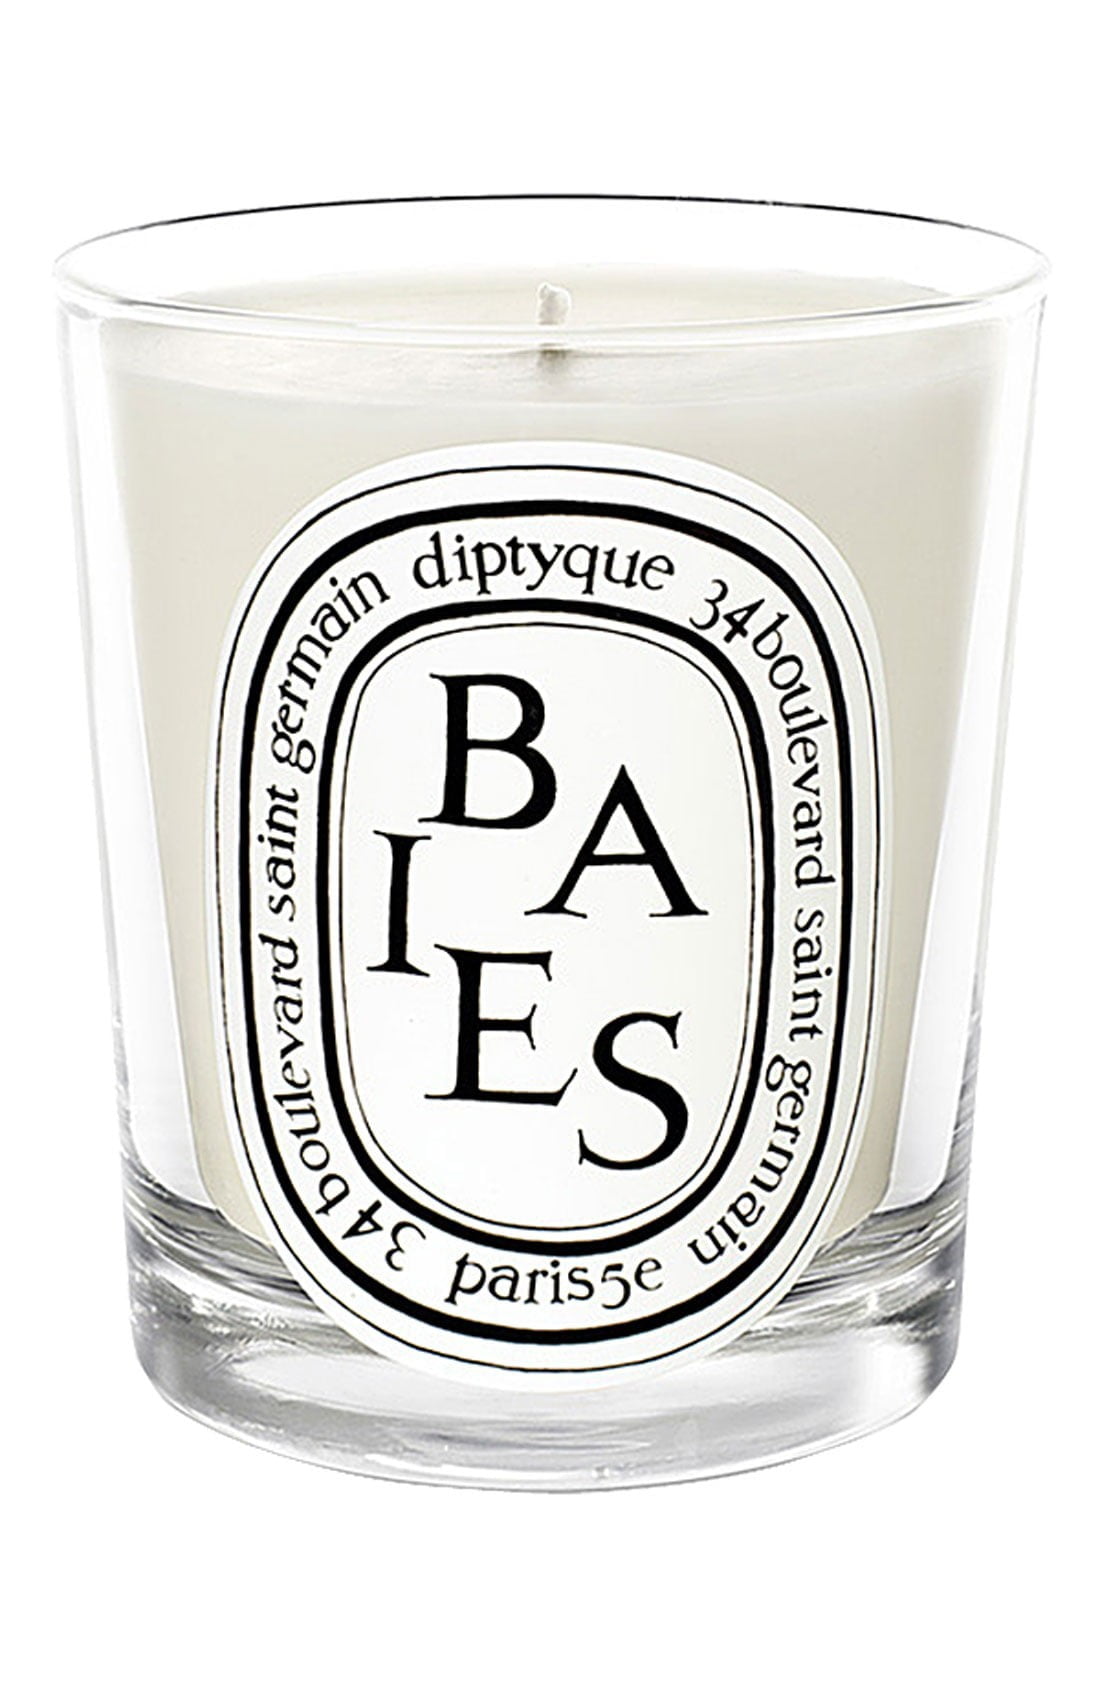 Click for more info about Baies Scented Candle